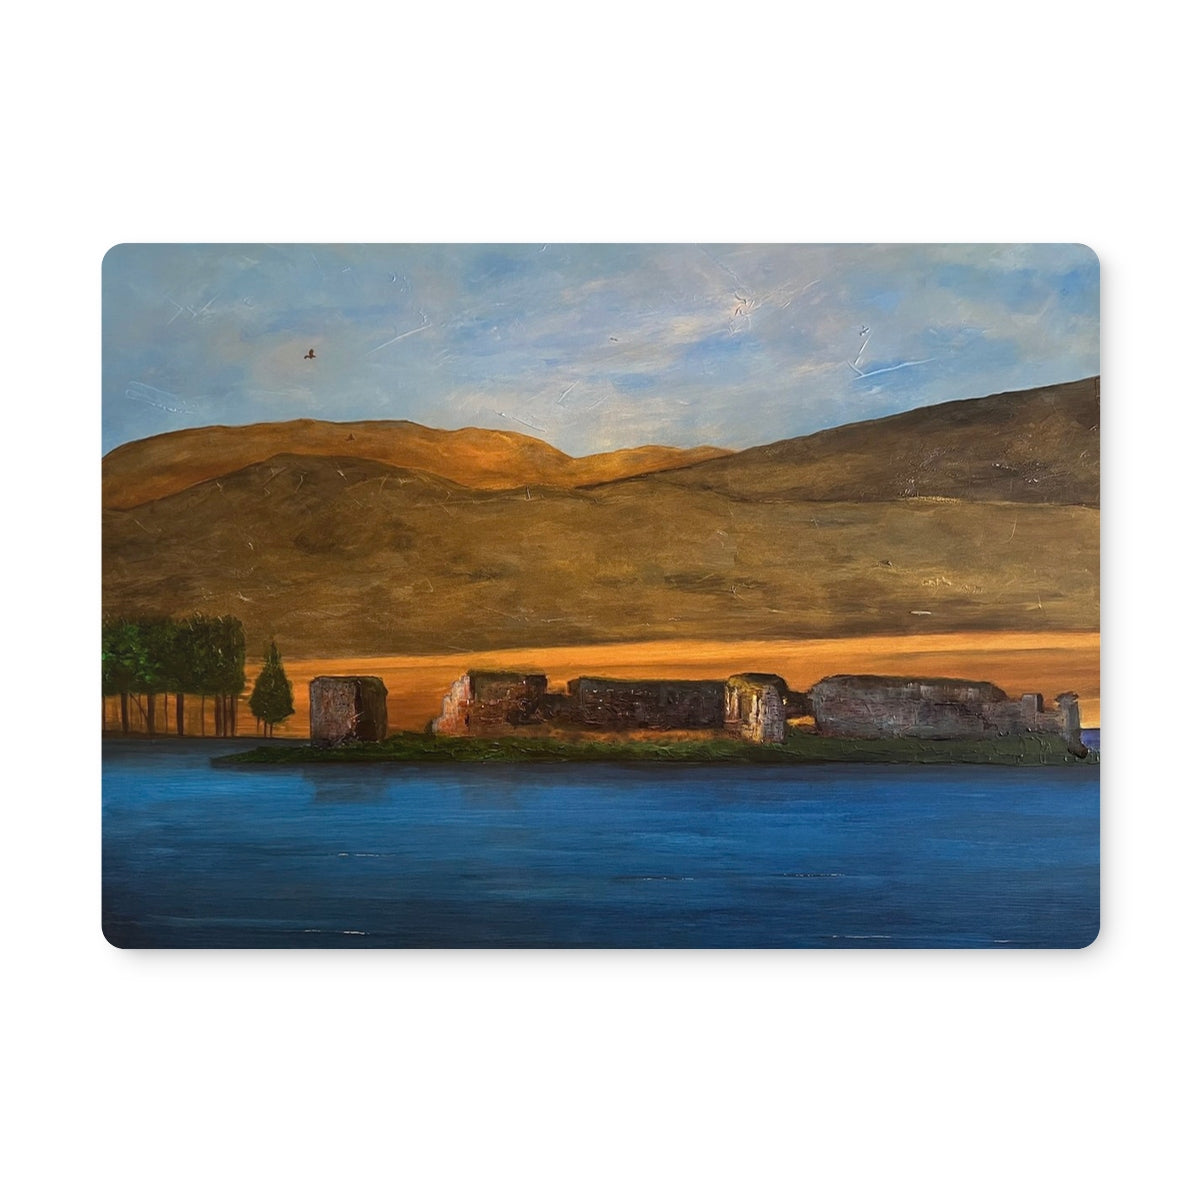 Lochindorb Castle Art Gifts Placemat-Placemats-Scottish Lochs & Mountains Art Gallery-4 Placemats-Paintings, Prints, Homeware, Art Gifts From Scotland By Scottish Artist Kevin Hunter